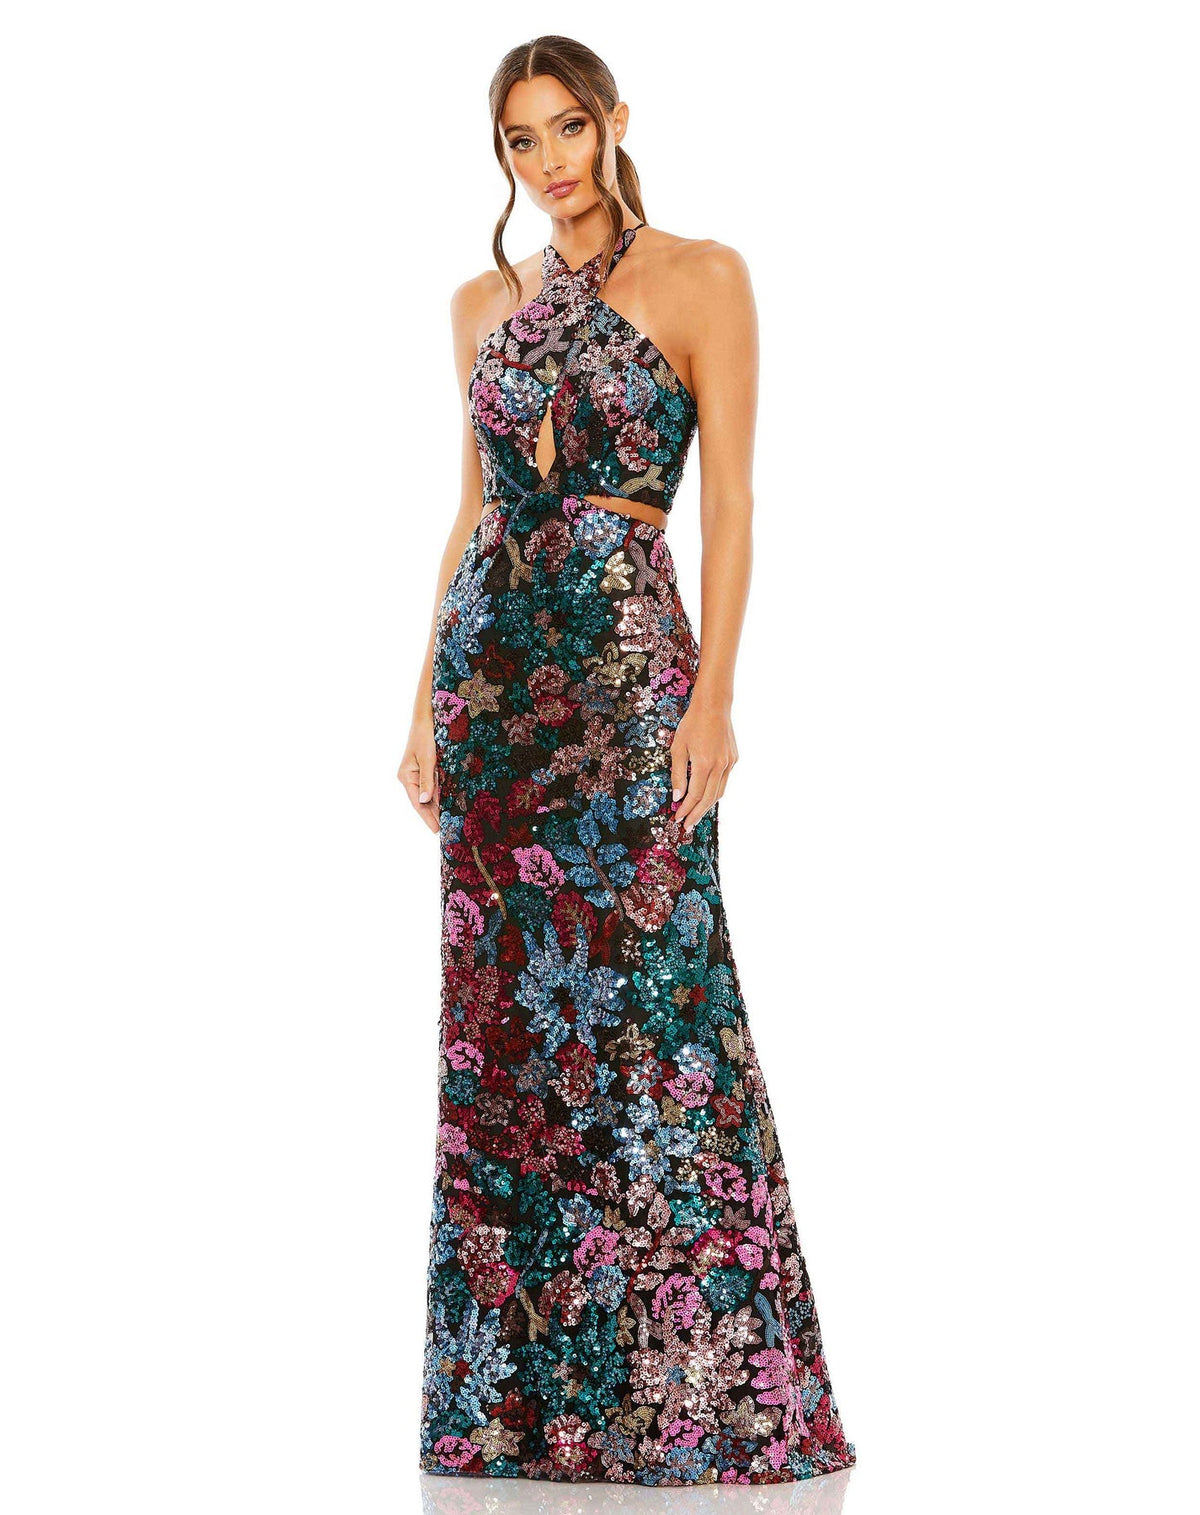 SEQUIN EMBELLISHED CROSS NECK GOWN Black Multi Style #49695